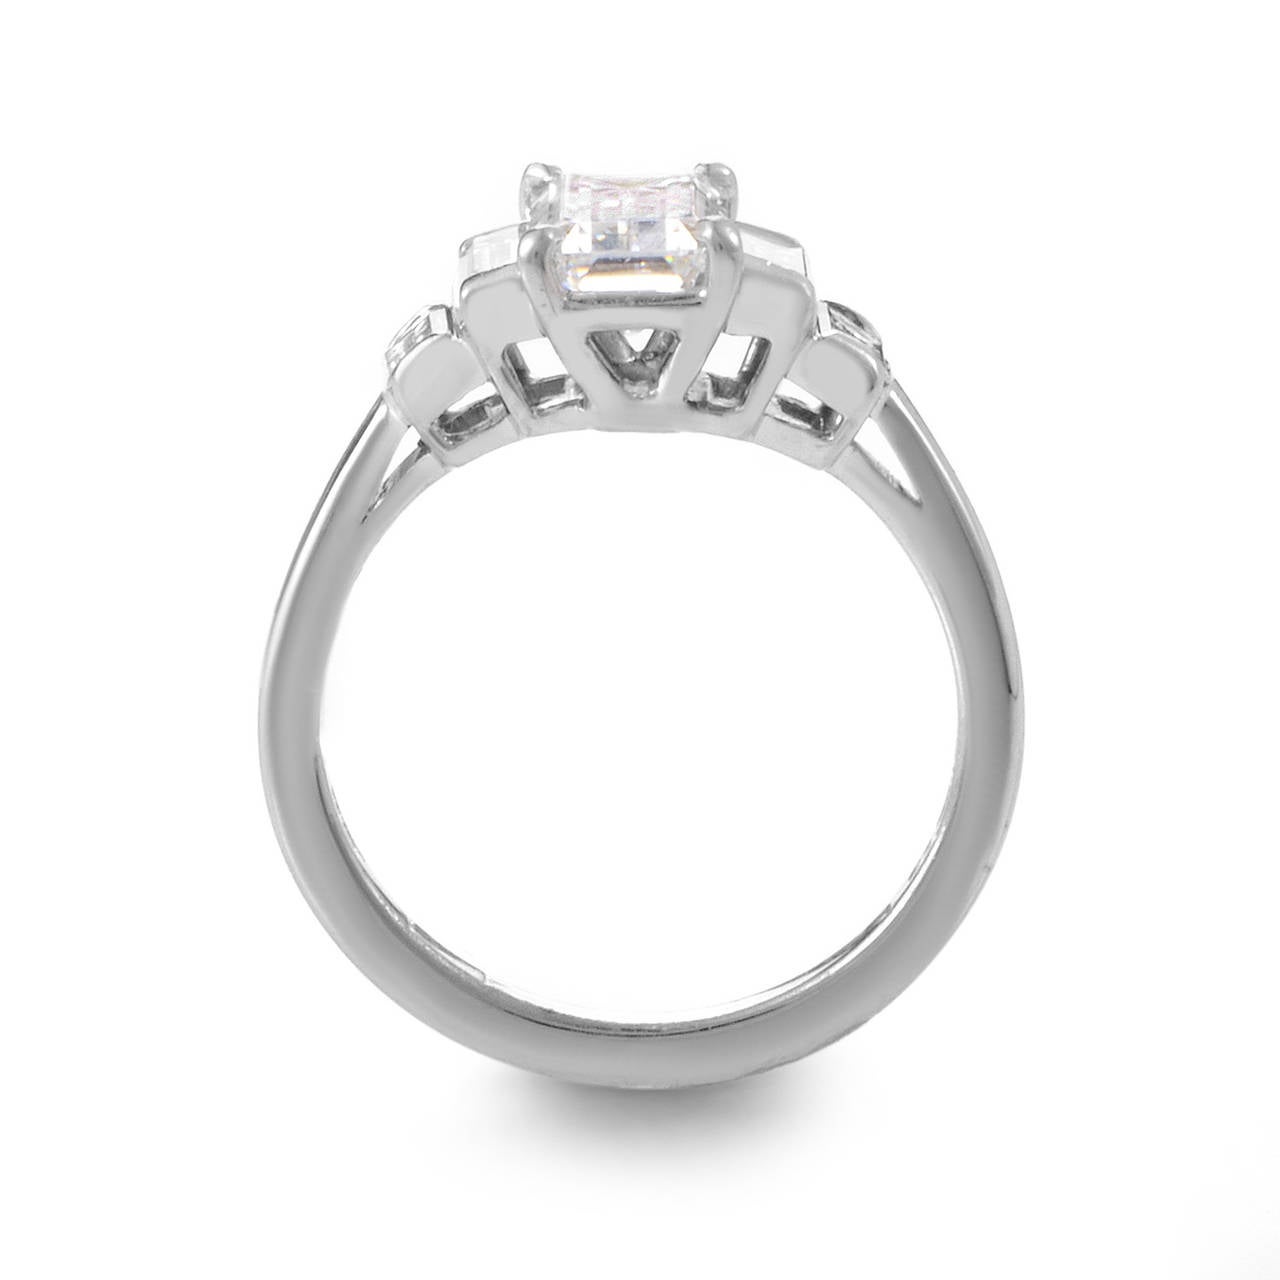 An exceptionally elegant and prestigious-looking piece, this magnificent GIA-certified Kwiat ring boasts a classy design that offers a stylish appearance. The ring is made of exemplary platinum and features a dazzling 1.63ct central diamond stone